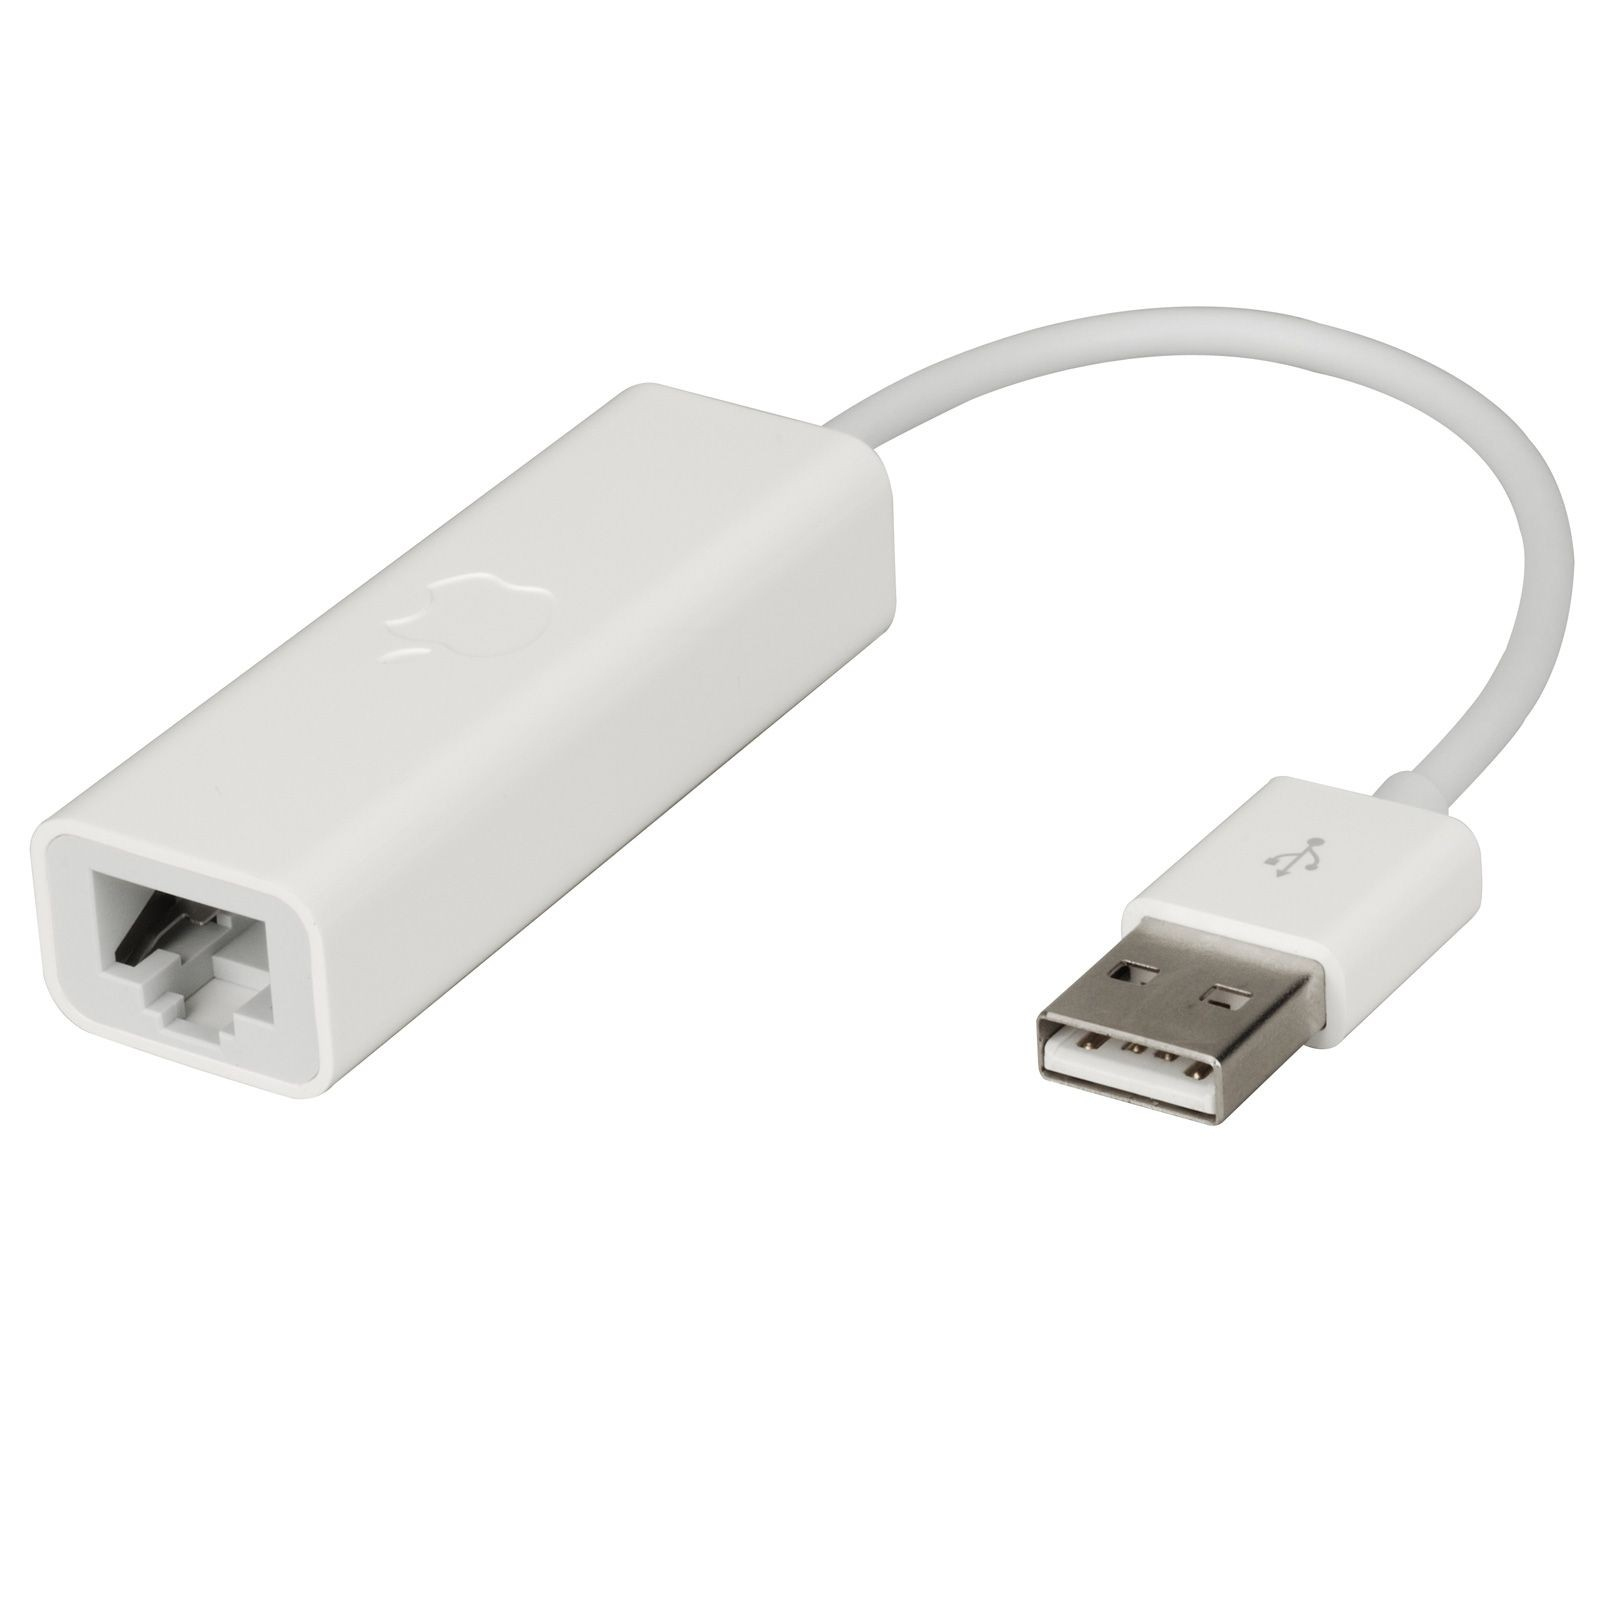 connect mac to pc usb